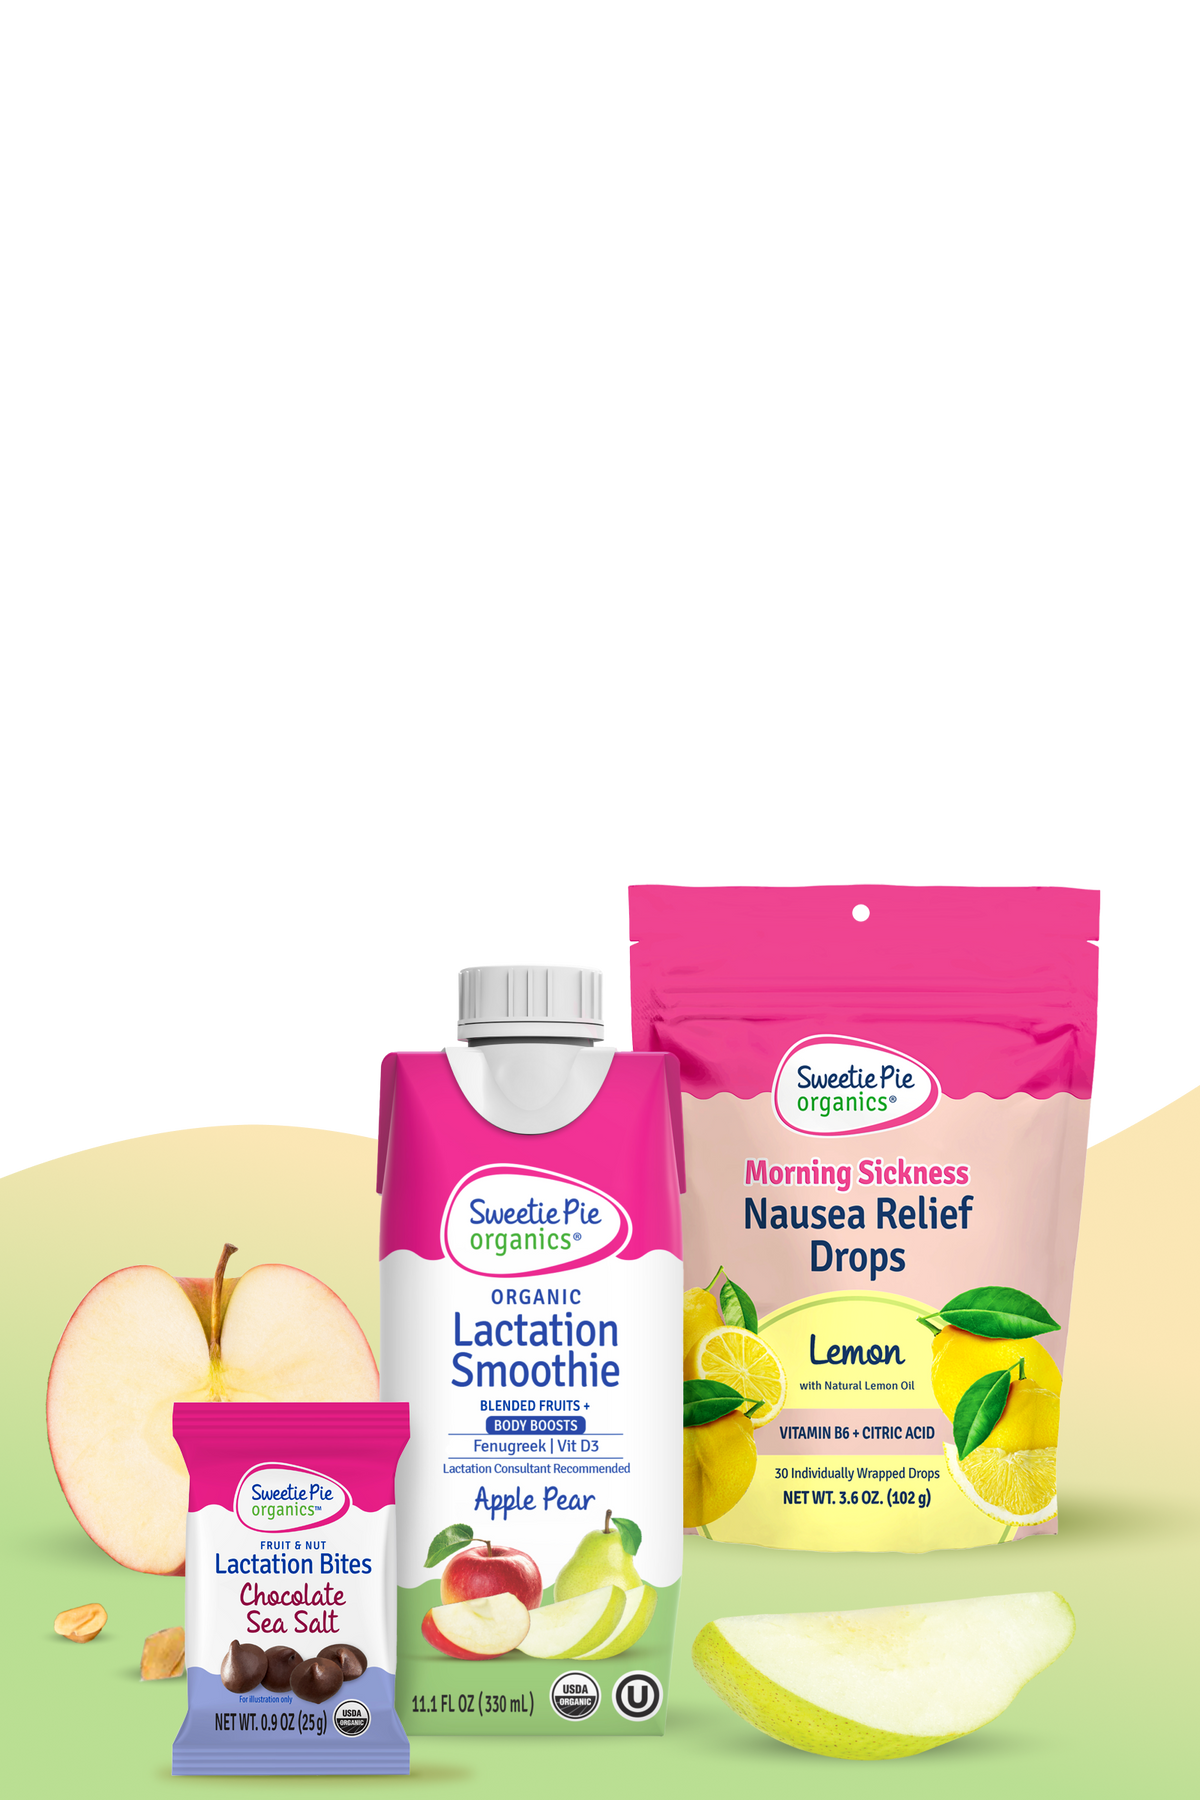 Sweetie Pie Organics home page image with fruit and product images of Lactation Bites, Lactation Smoothie, and Morning Sickness Nausea Relief Drops